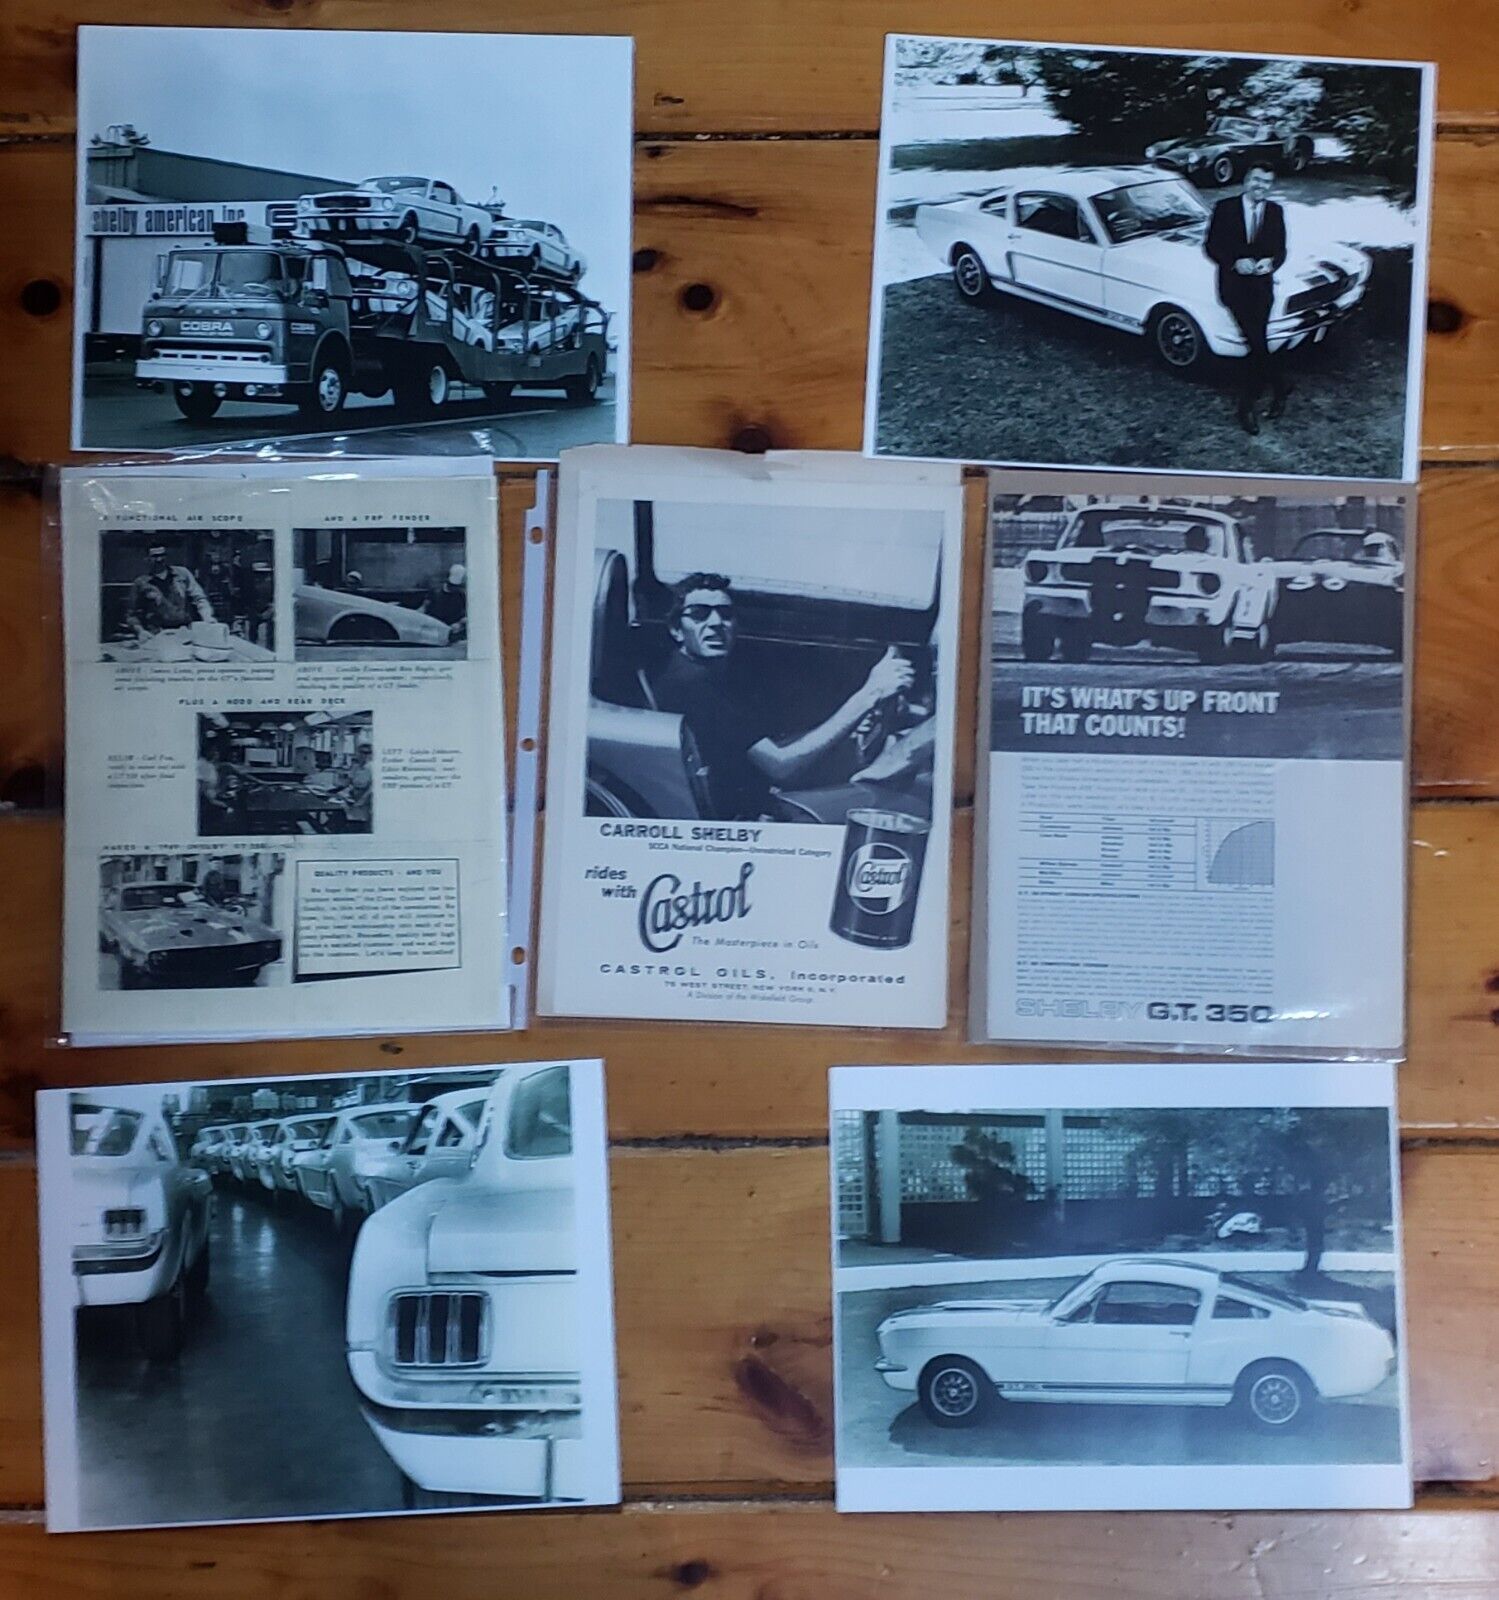 CARROLL SHELBY SHELBY AMERICAN ADVERTISING + MAGAZINE ARTICLES OF THE 1965 GT350